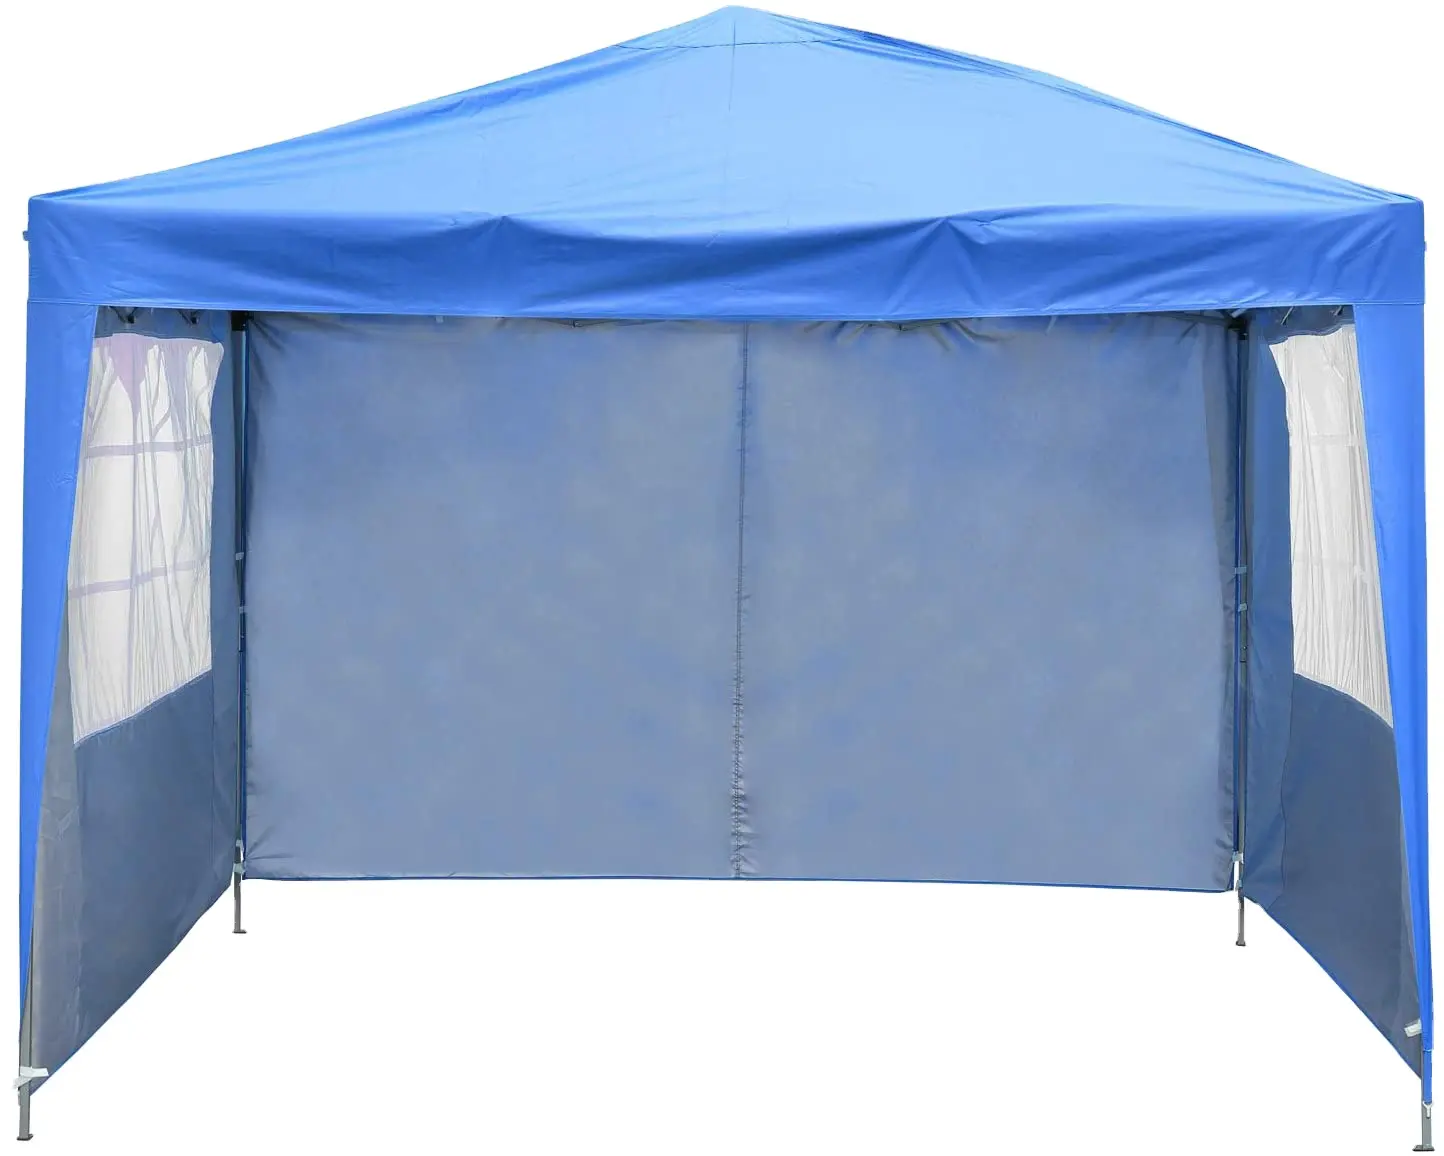 folding Shelter Canopy 10' x 10'ft with side walls,with 4 Removable Sidewalls Blue gazebo